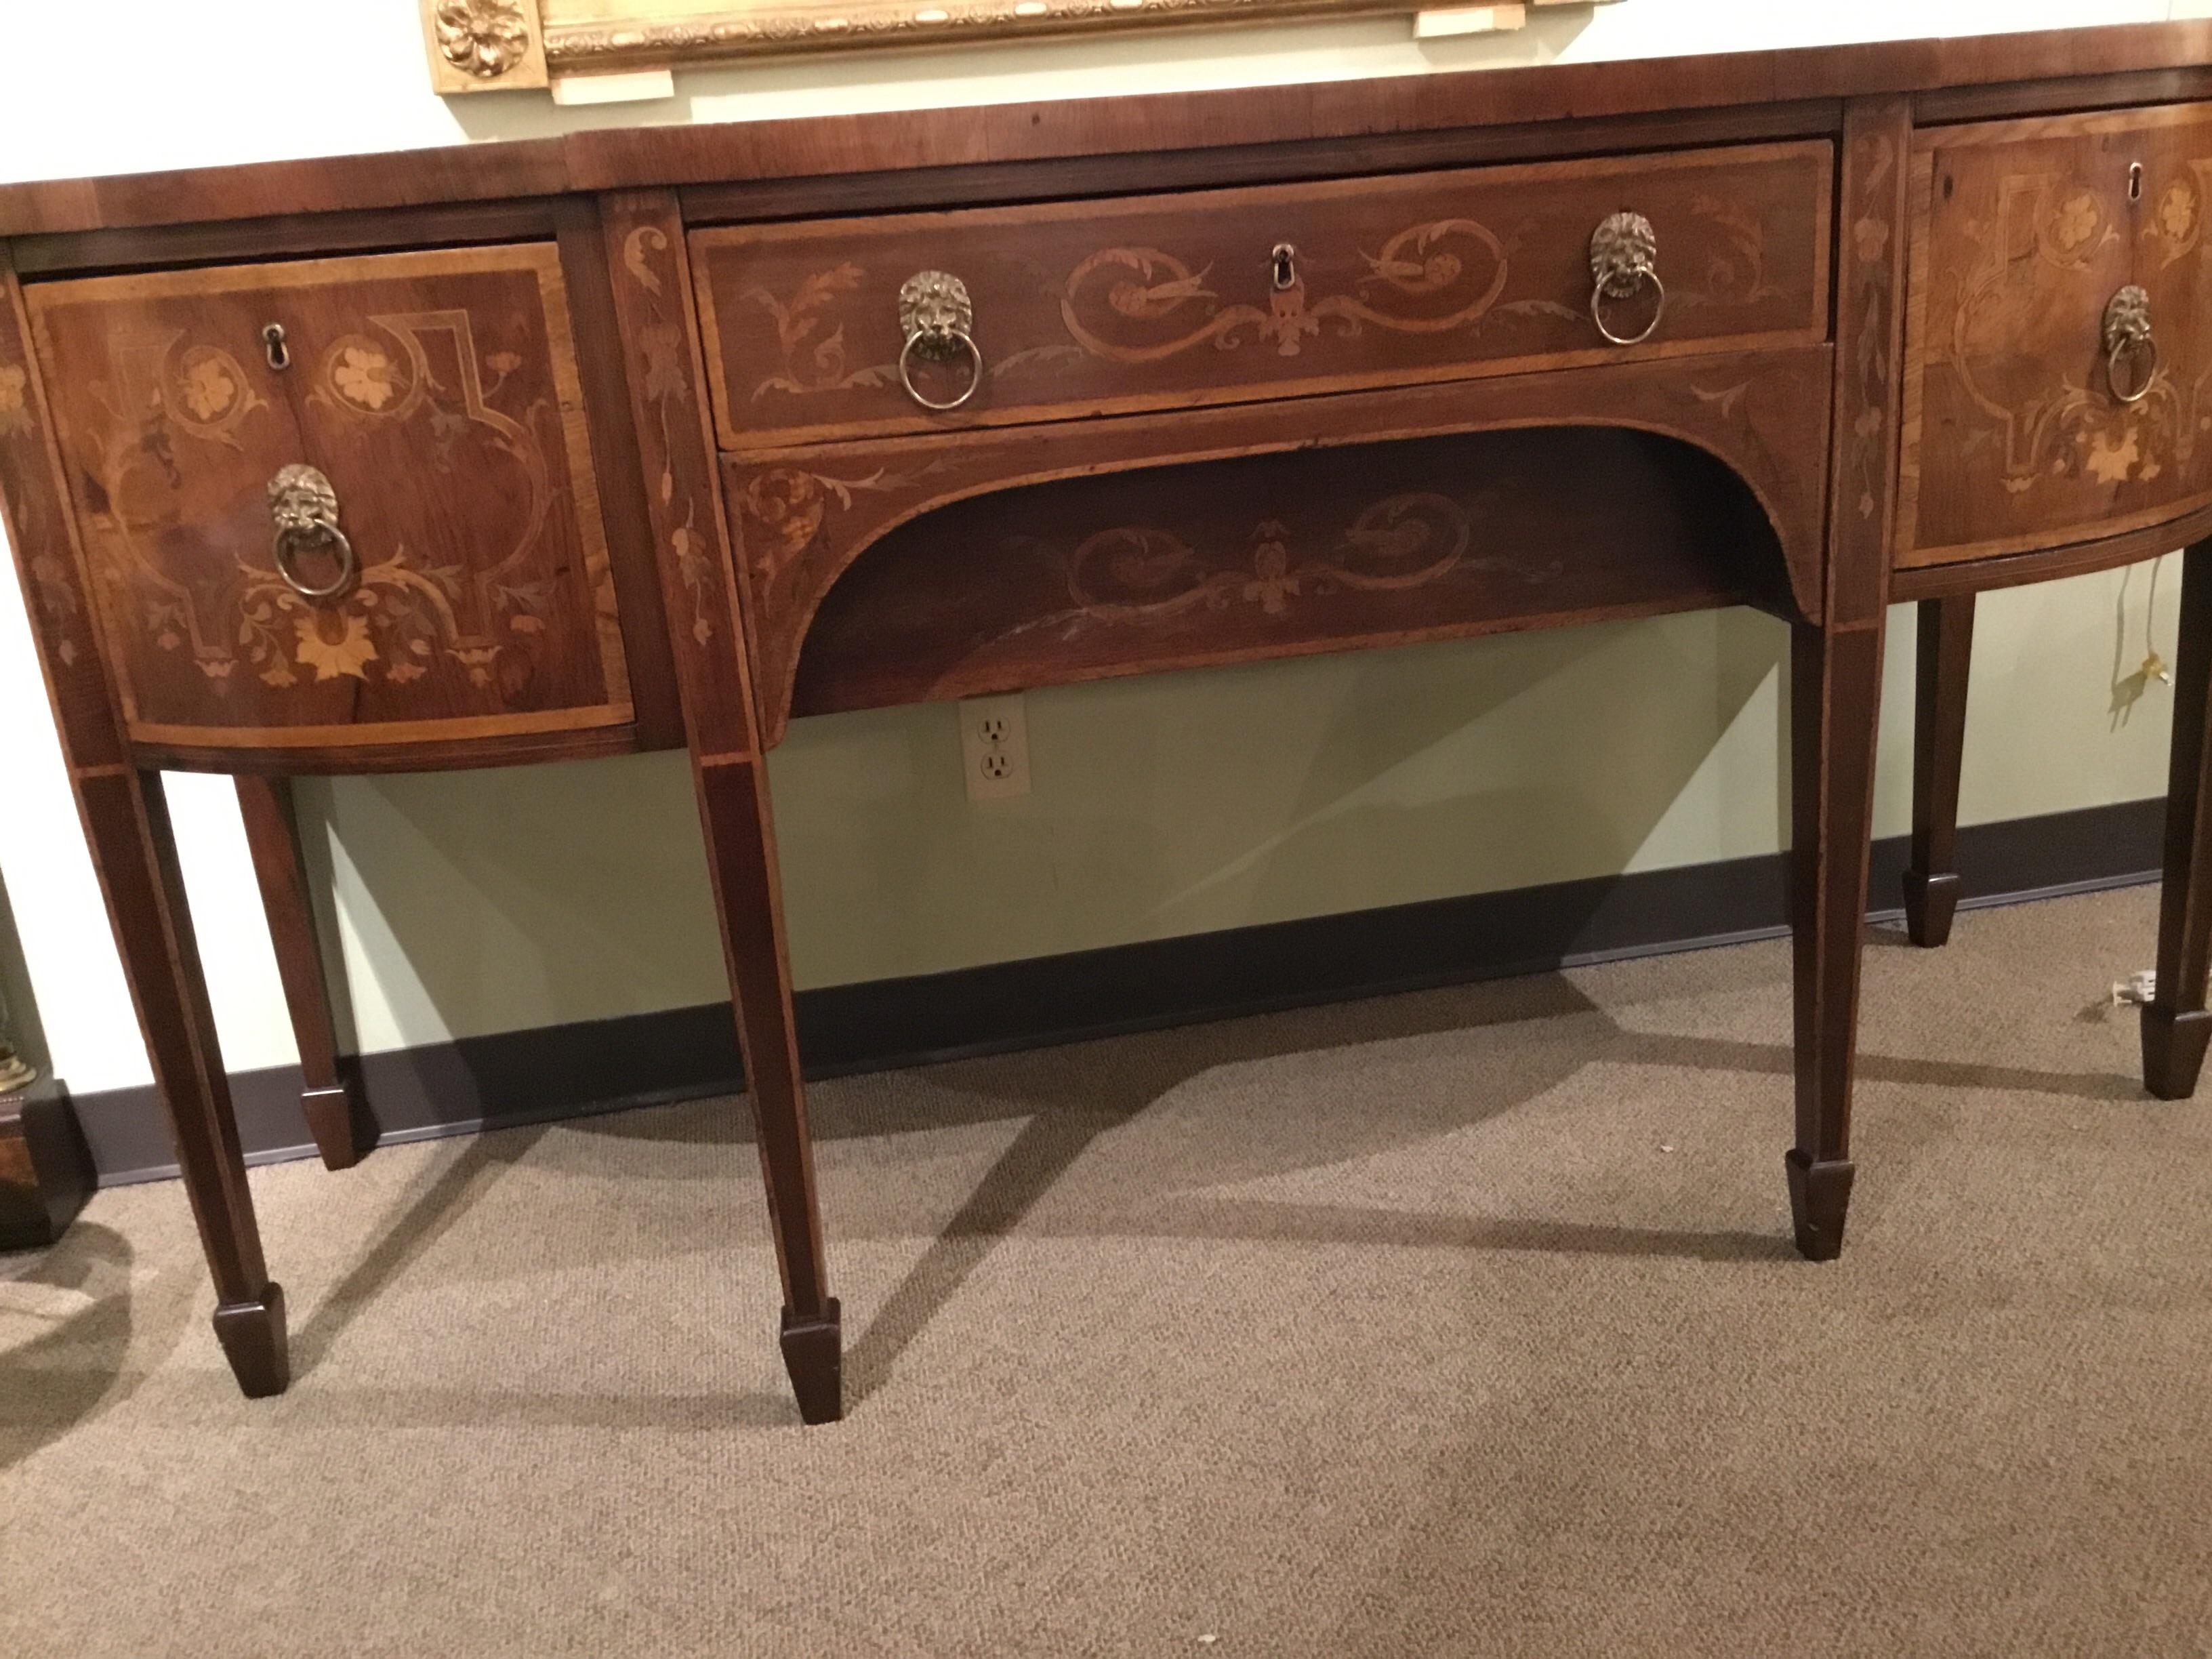 This is a 19th century server and buffet with original
patina having marquetry work in satinwood.
Straight tapered legs. Original brass hardware. Two
Drawers flanking each side. With one centre drawer.
All drawers slide easily. Structure is